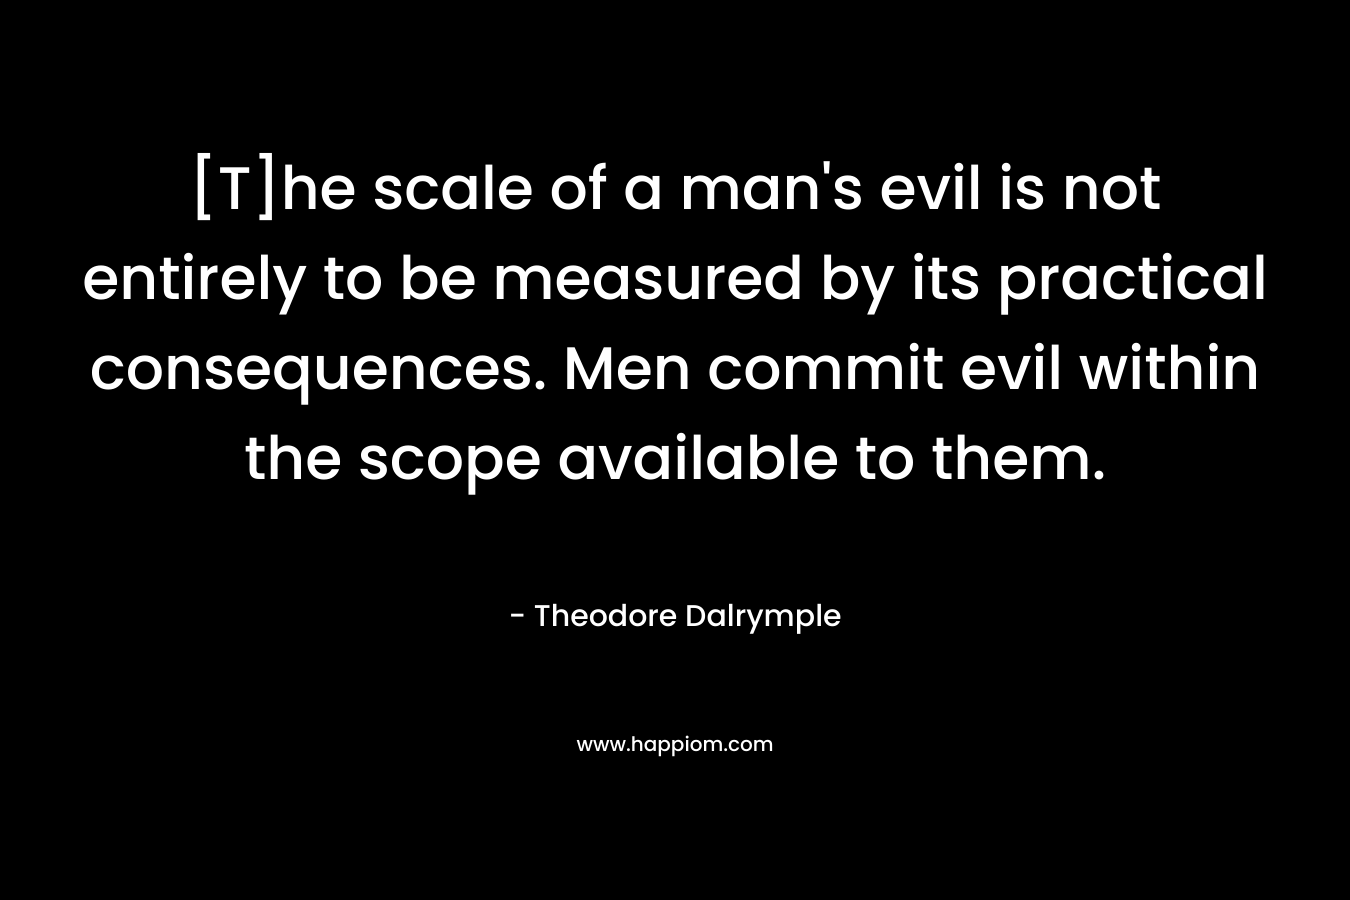 [T]he scale of a man’s evil is not entirely to be measured by its practical consequences. Men commit evil within the scope available to them. – Theodore Dalrymple